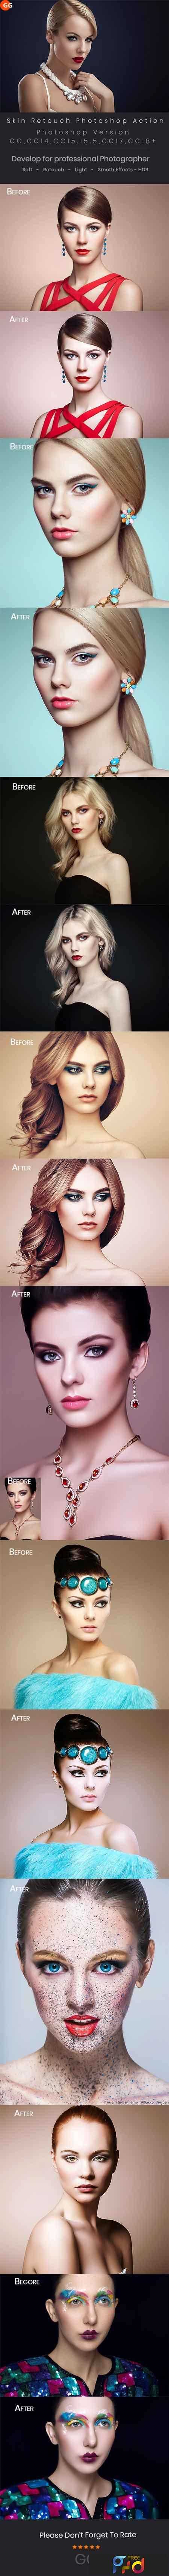 10 Skin Retouch Photoshop Action